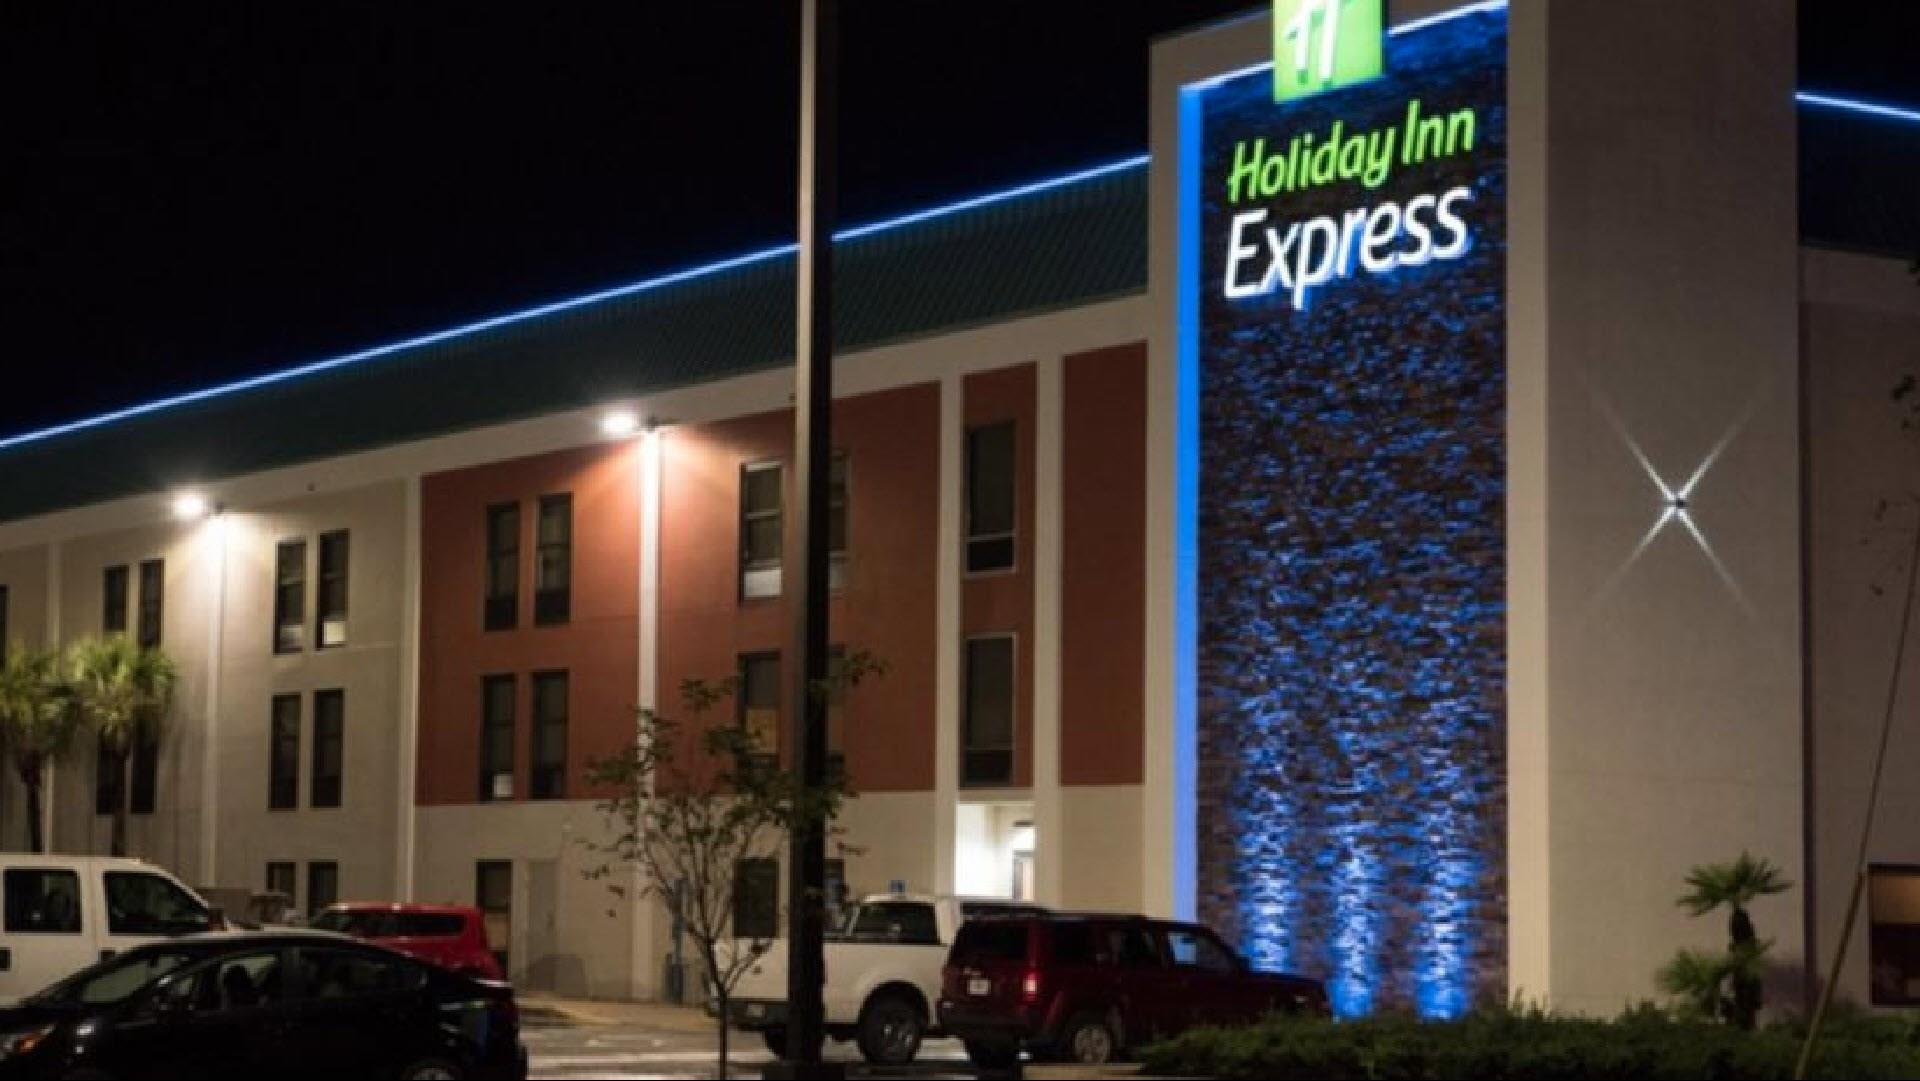 Holiday Inn Express Hotel Pascagoula Moss Point in Moss Point, MS